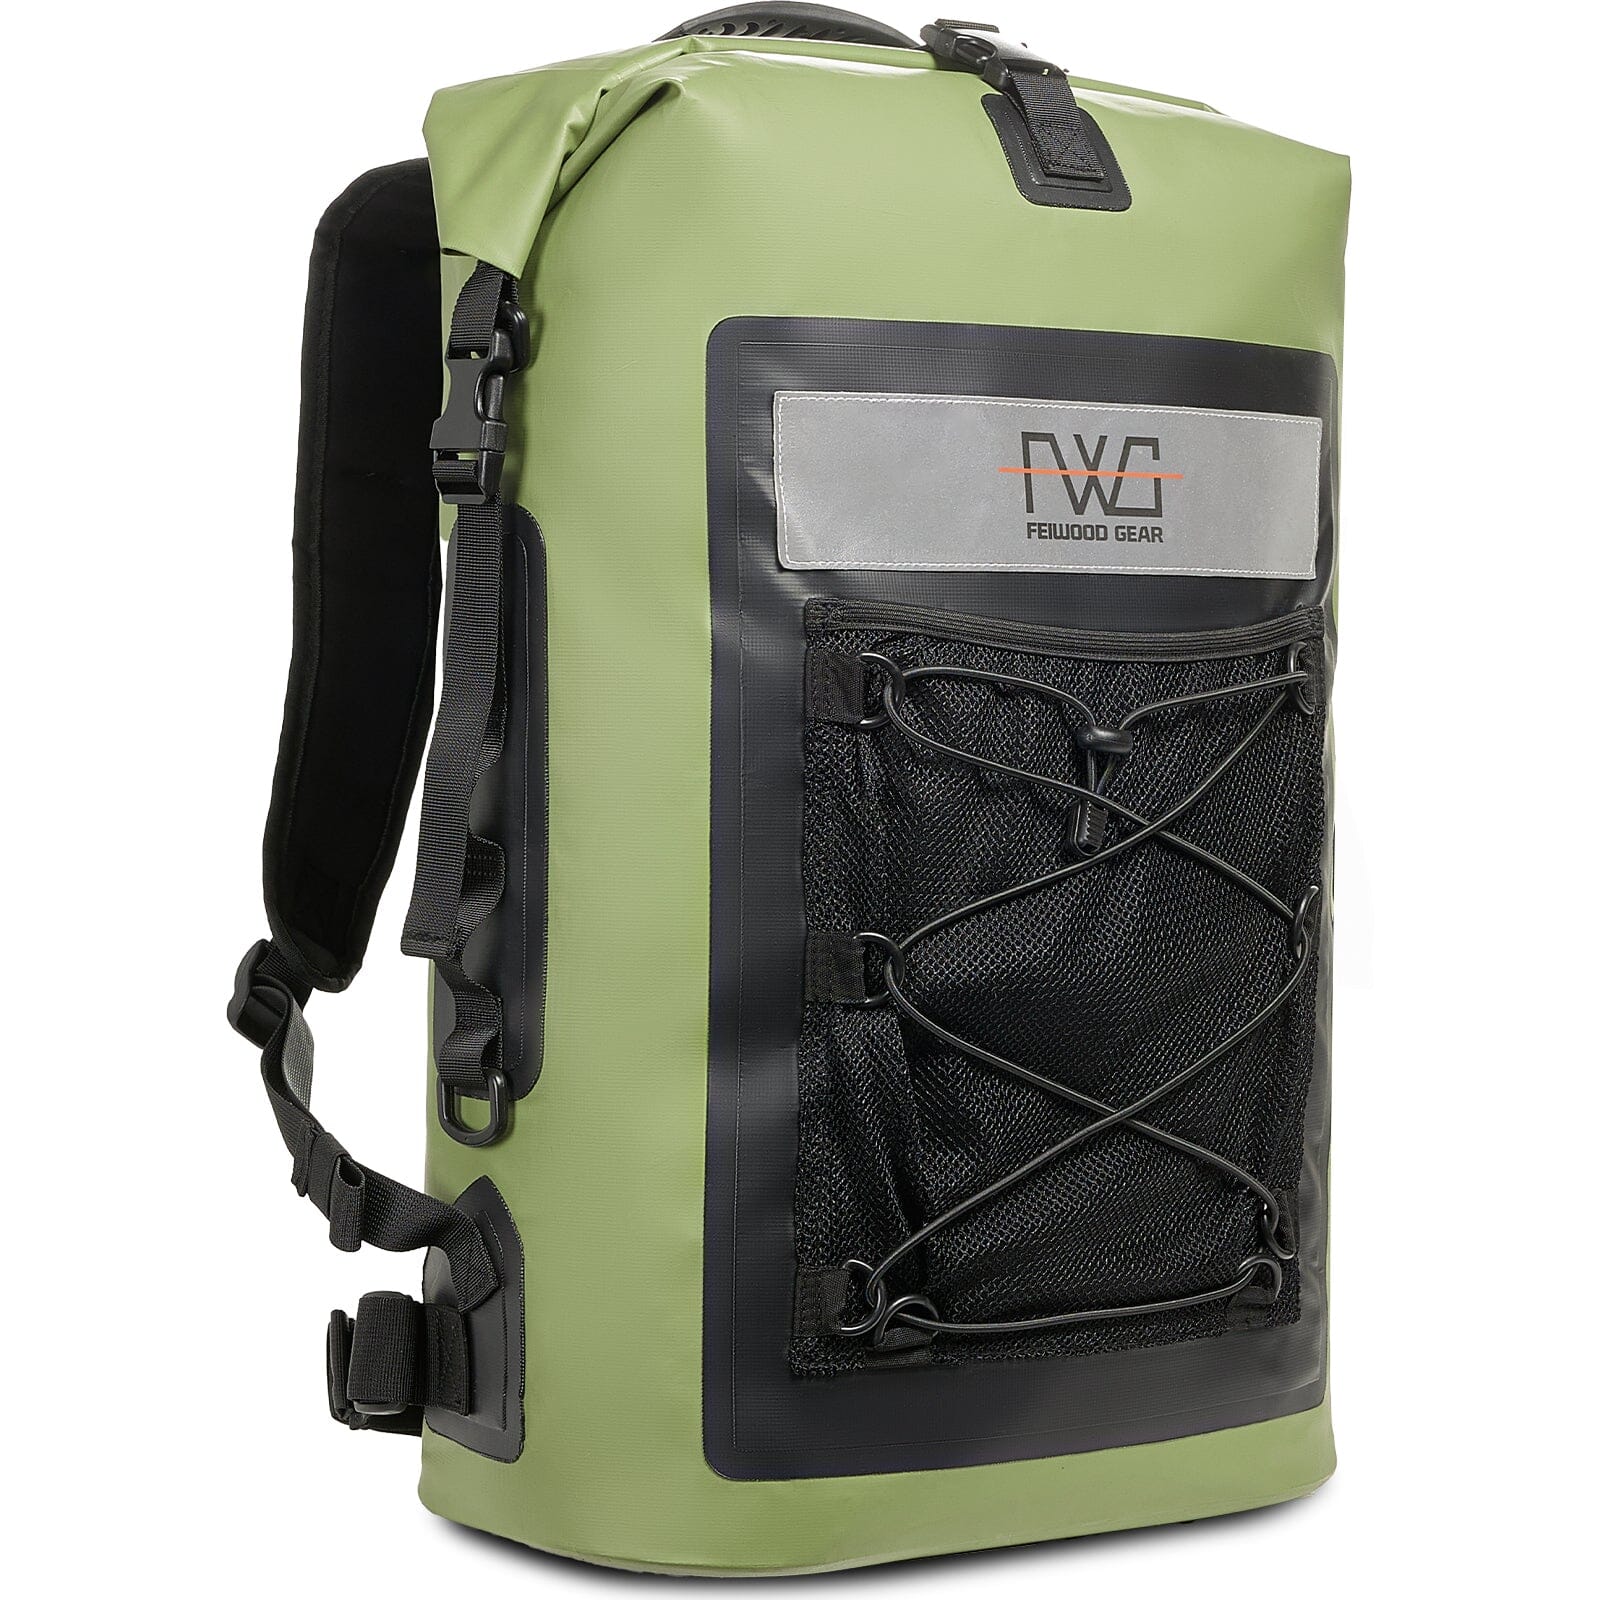 FEIWOOD GEAR Dry Bag Backpack,40L Floating Backpack Roll-Top Closure.